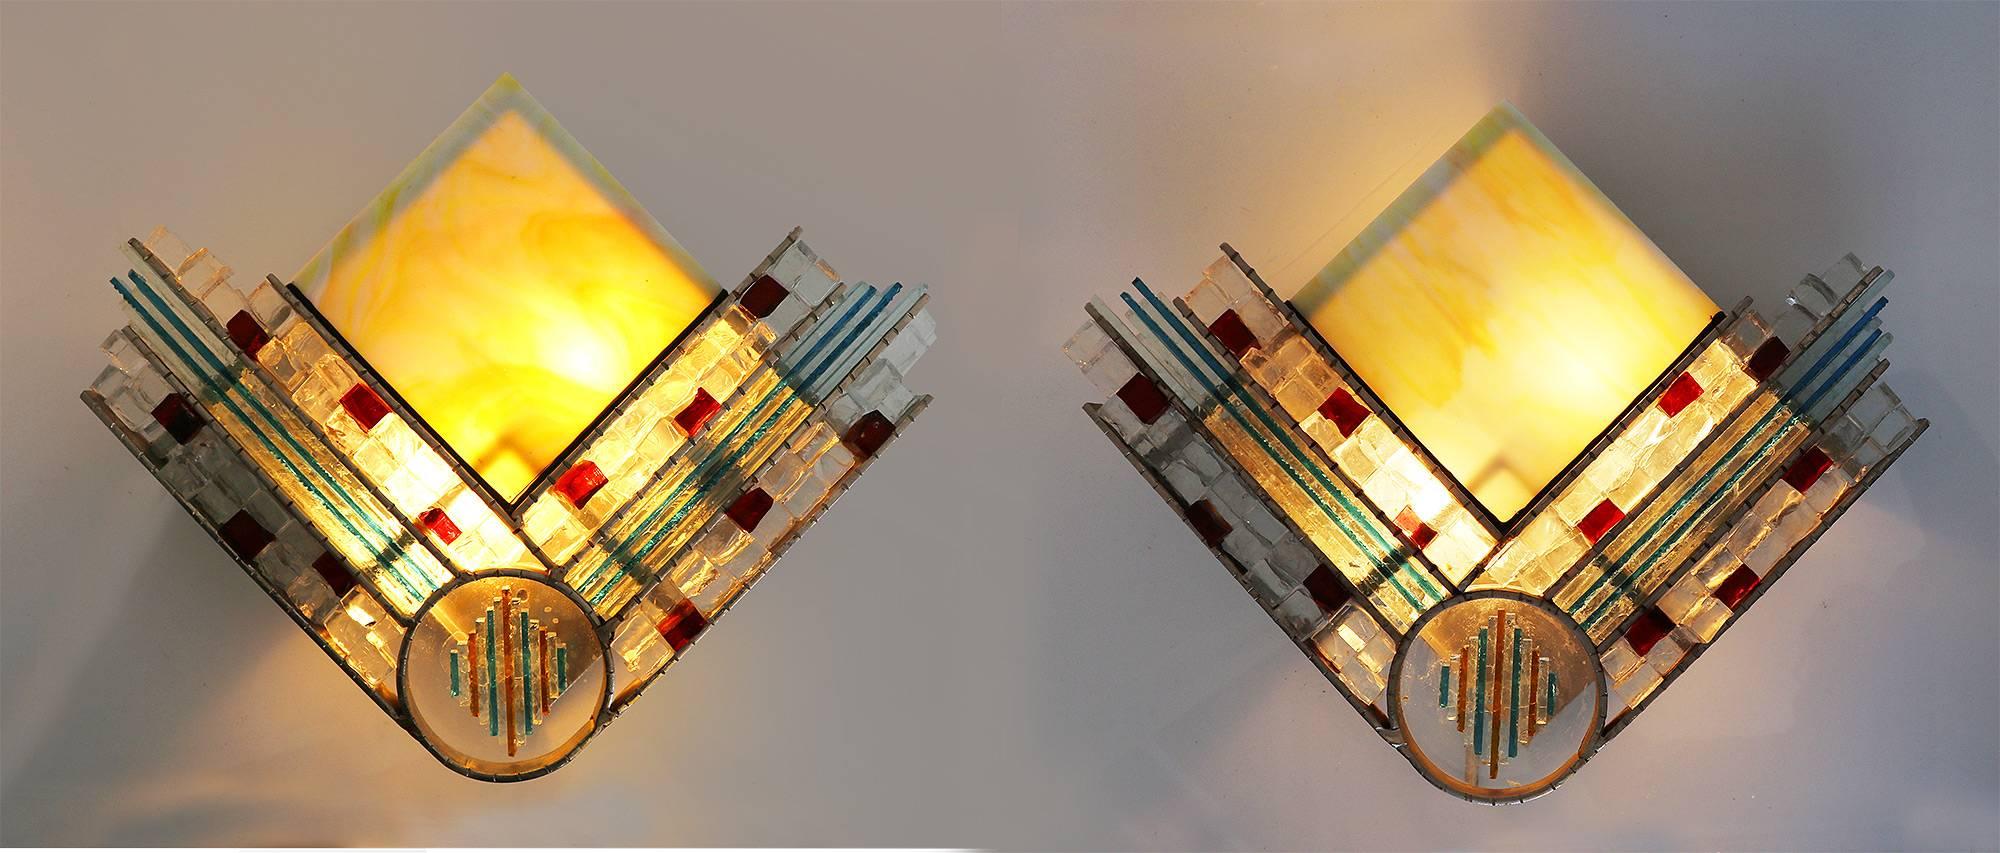 Brutalist Pair of Glass Wall Sconces 'Chartres' by Willem van Oyen Sr. for RAAK 1970s